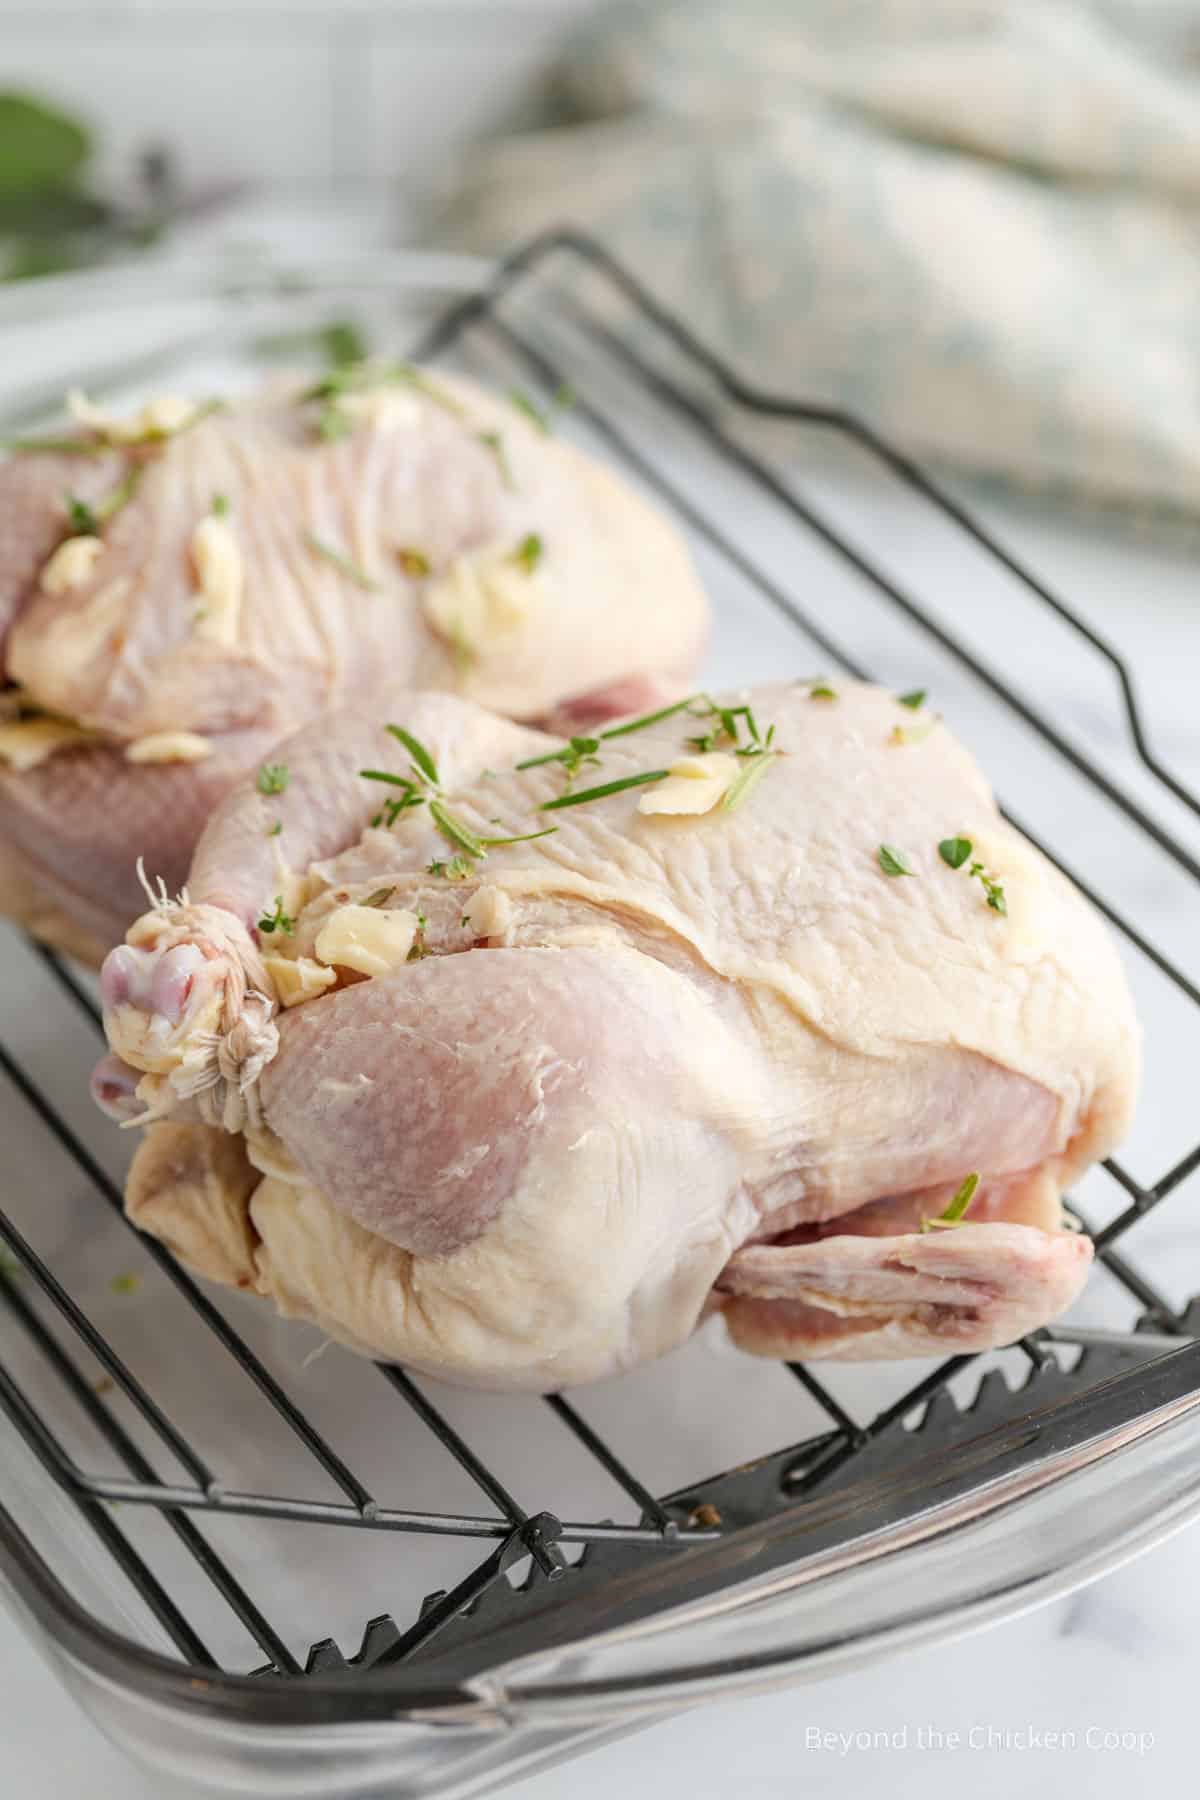 Butter and herbs on uncooked hens. 